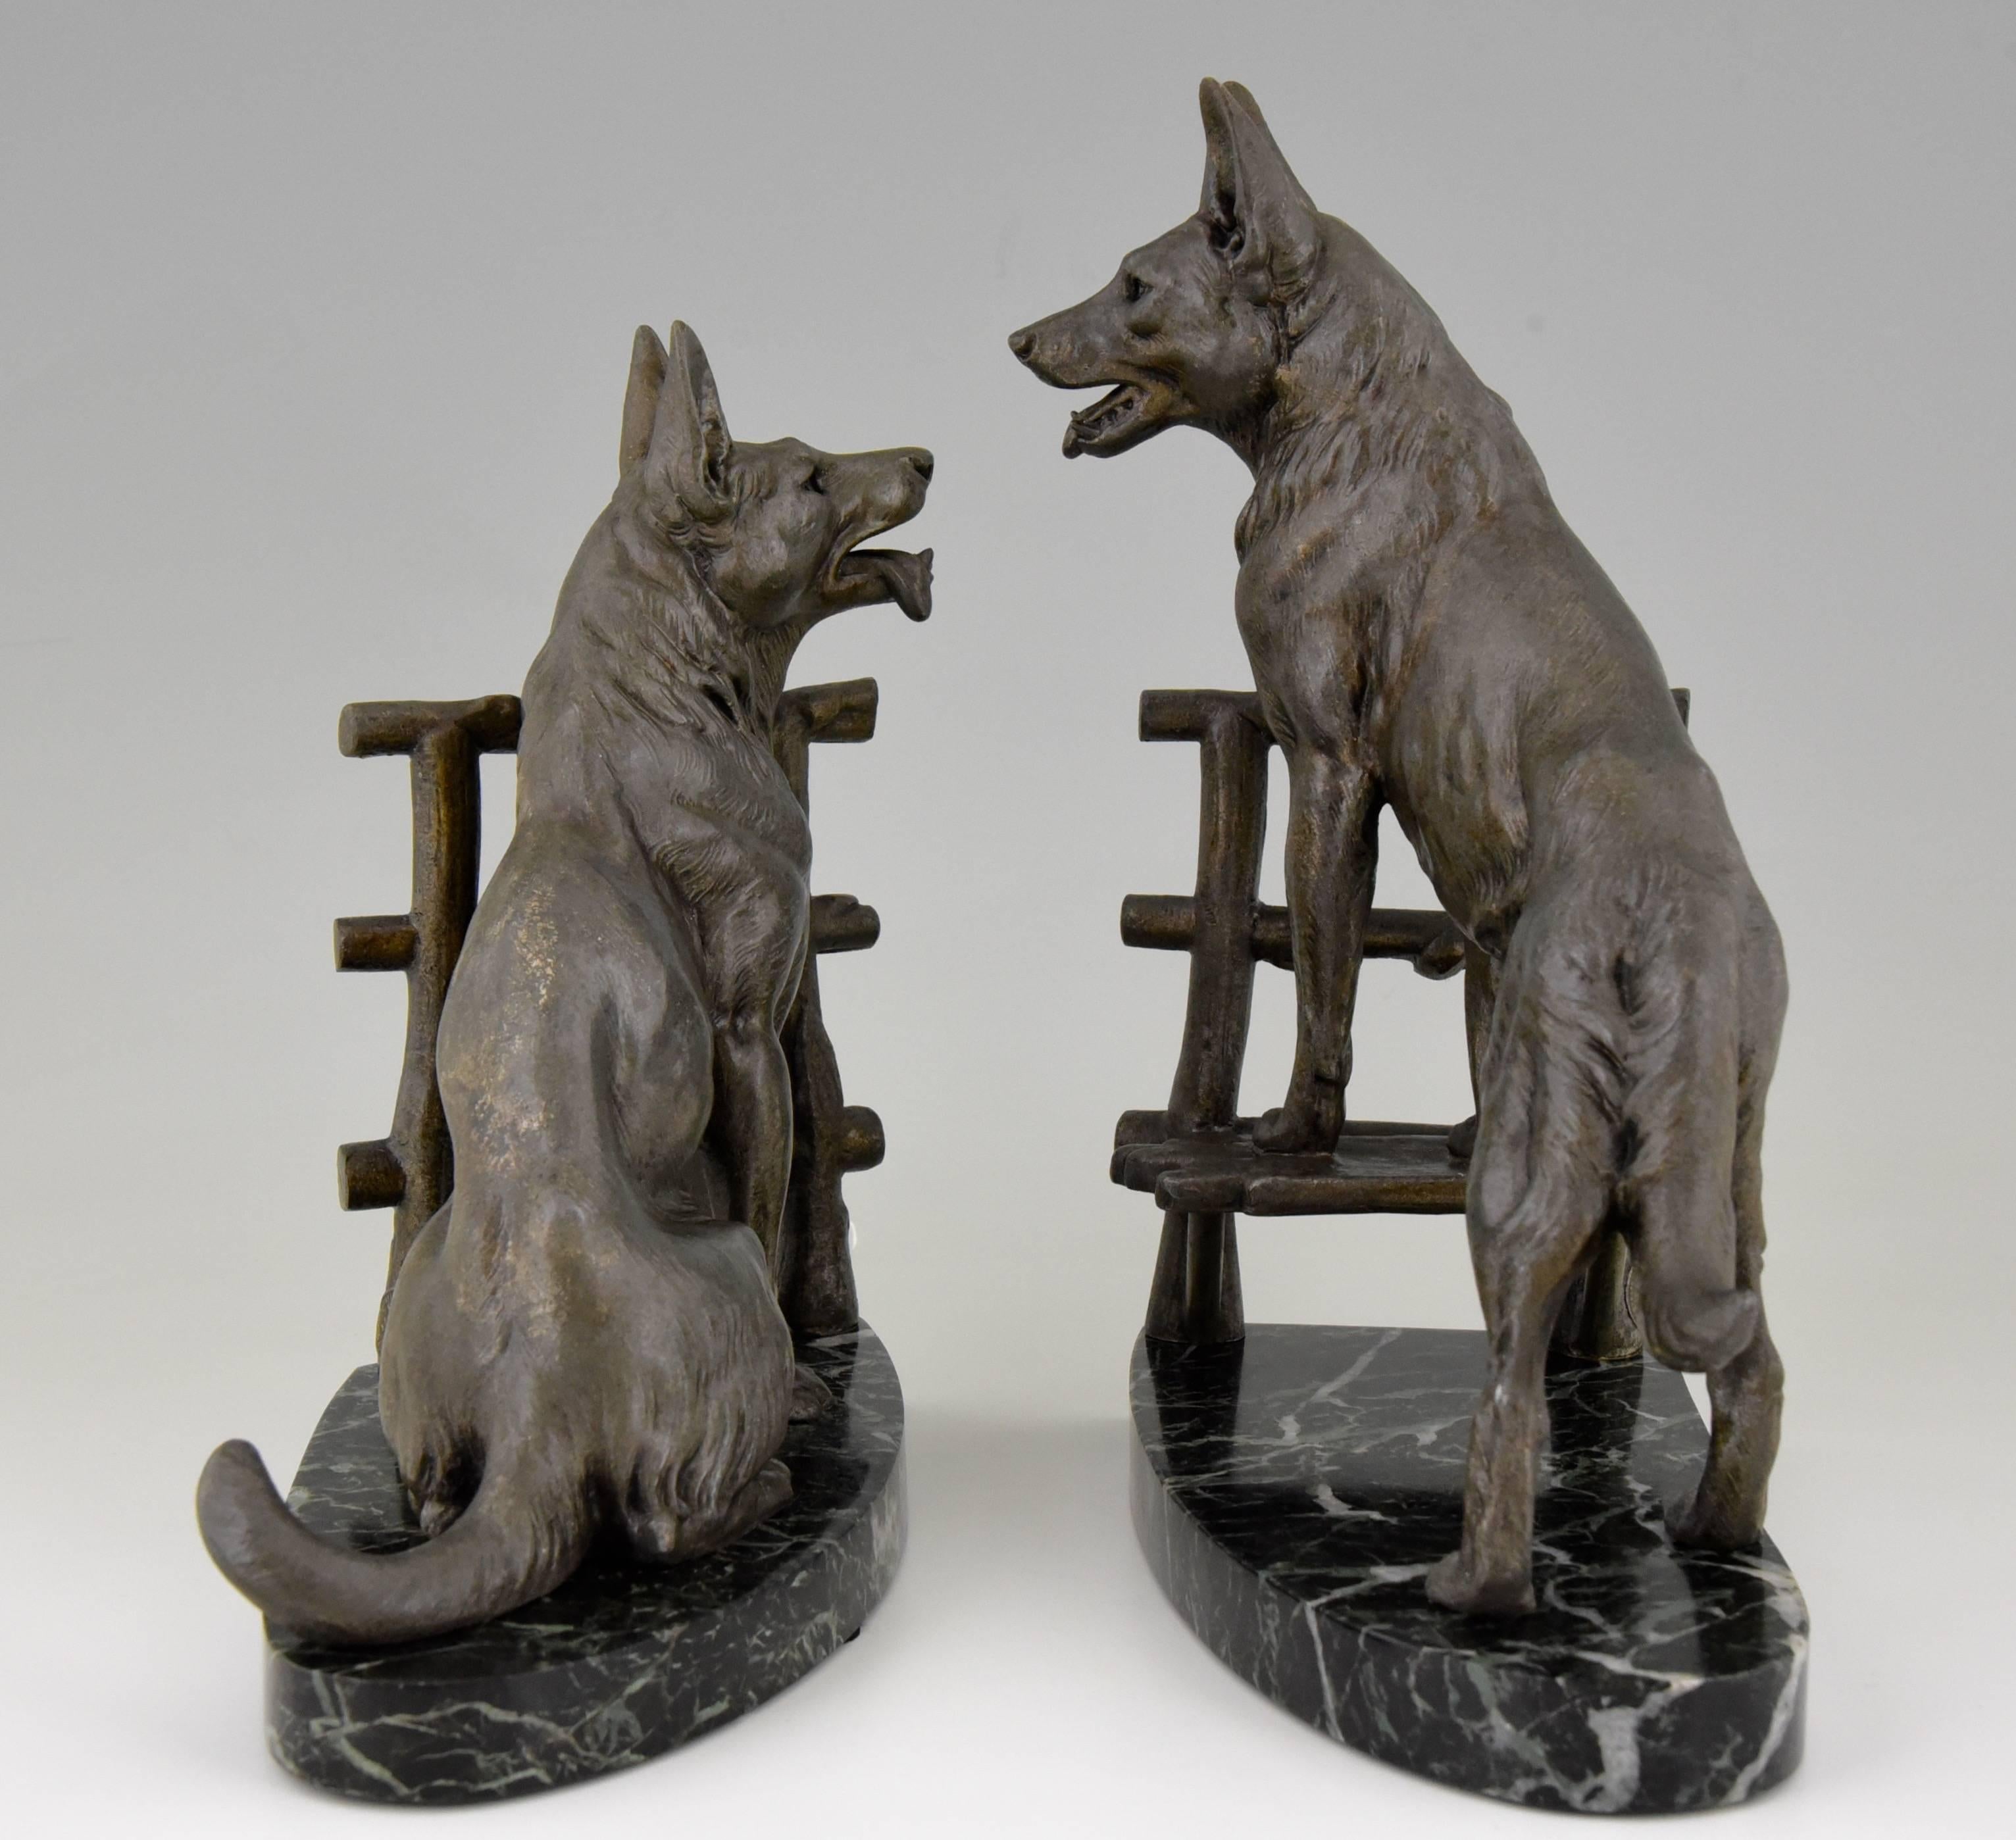 French Art Deco German Shepherd Dog Bookends by Carvin, 1930 France